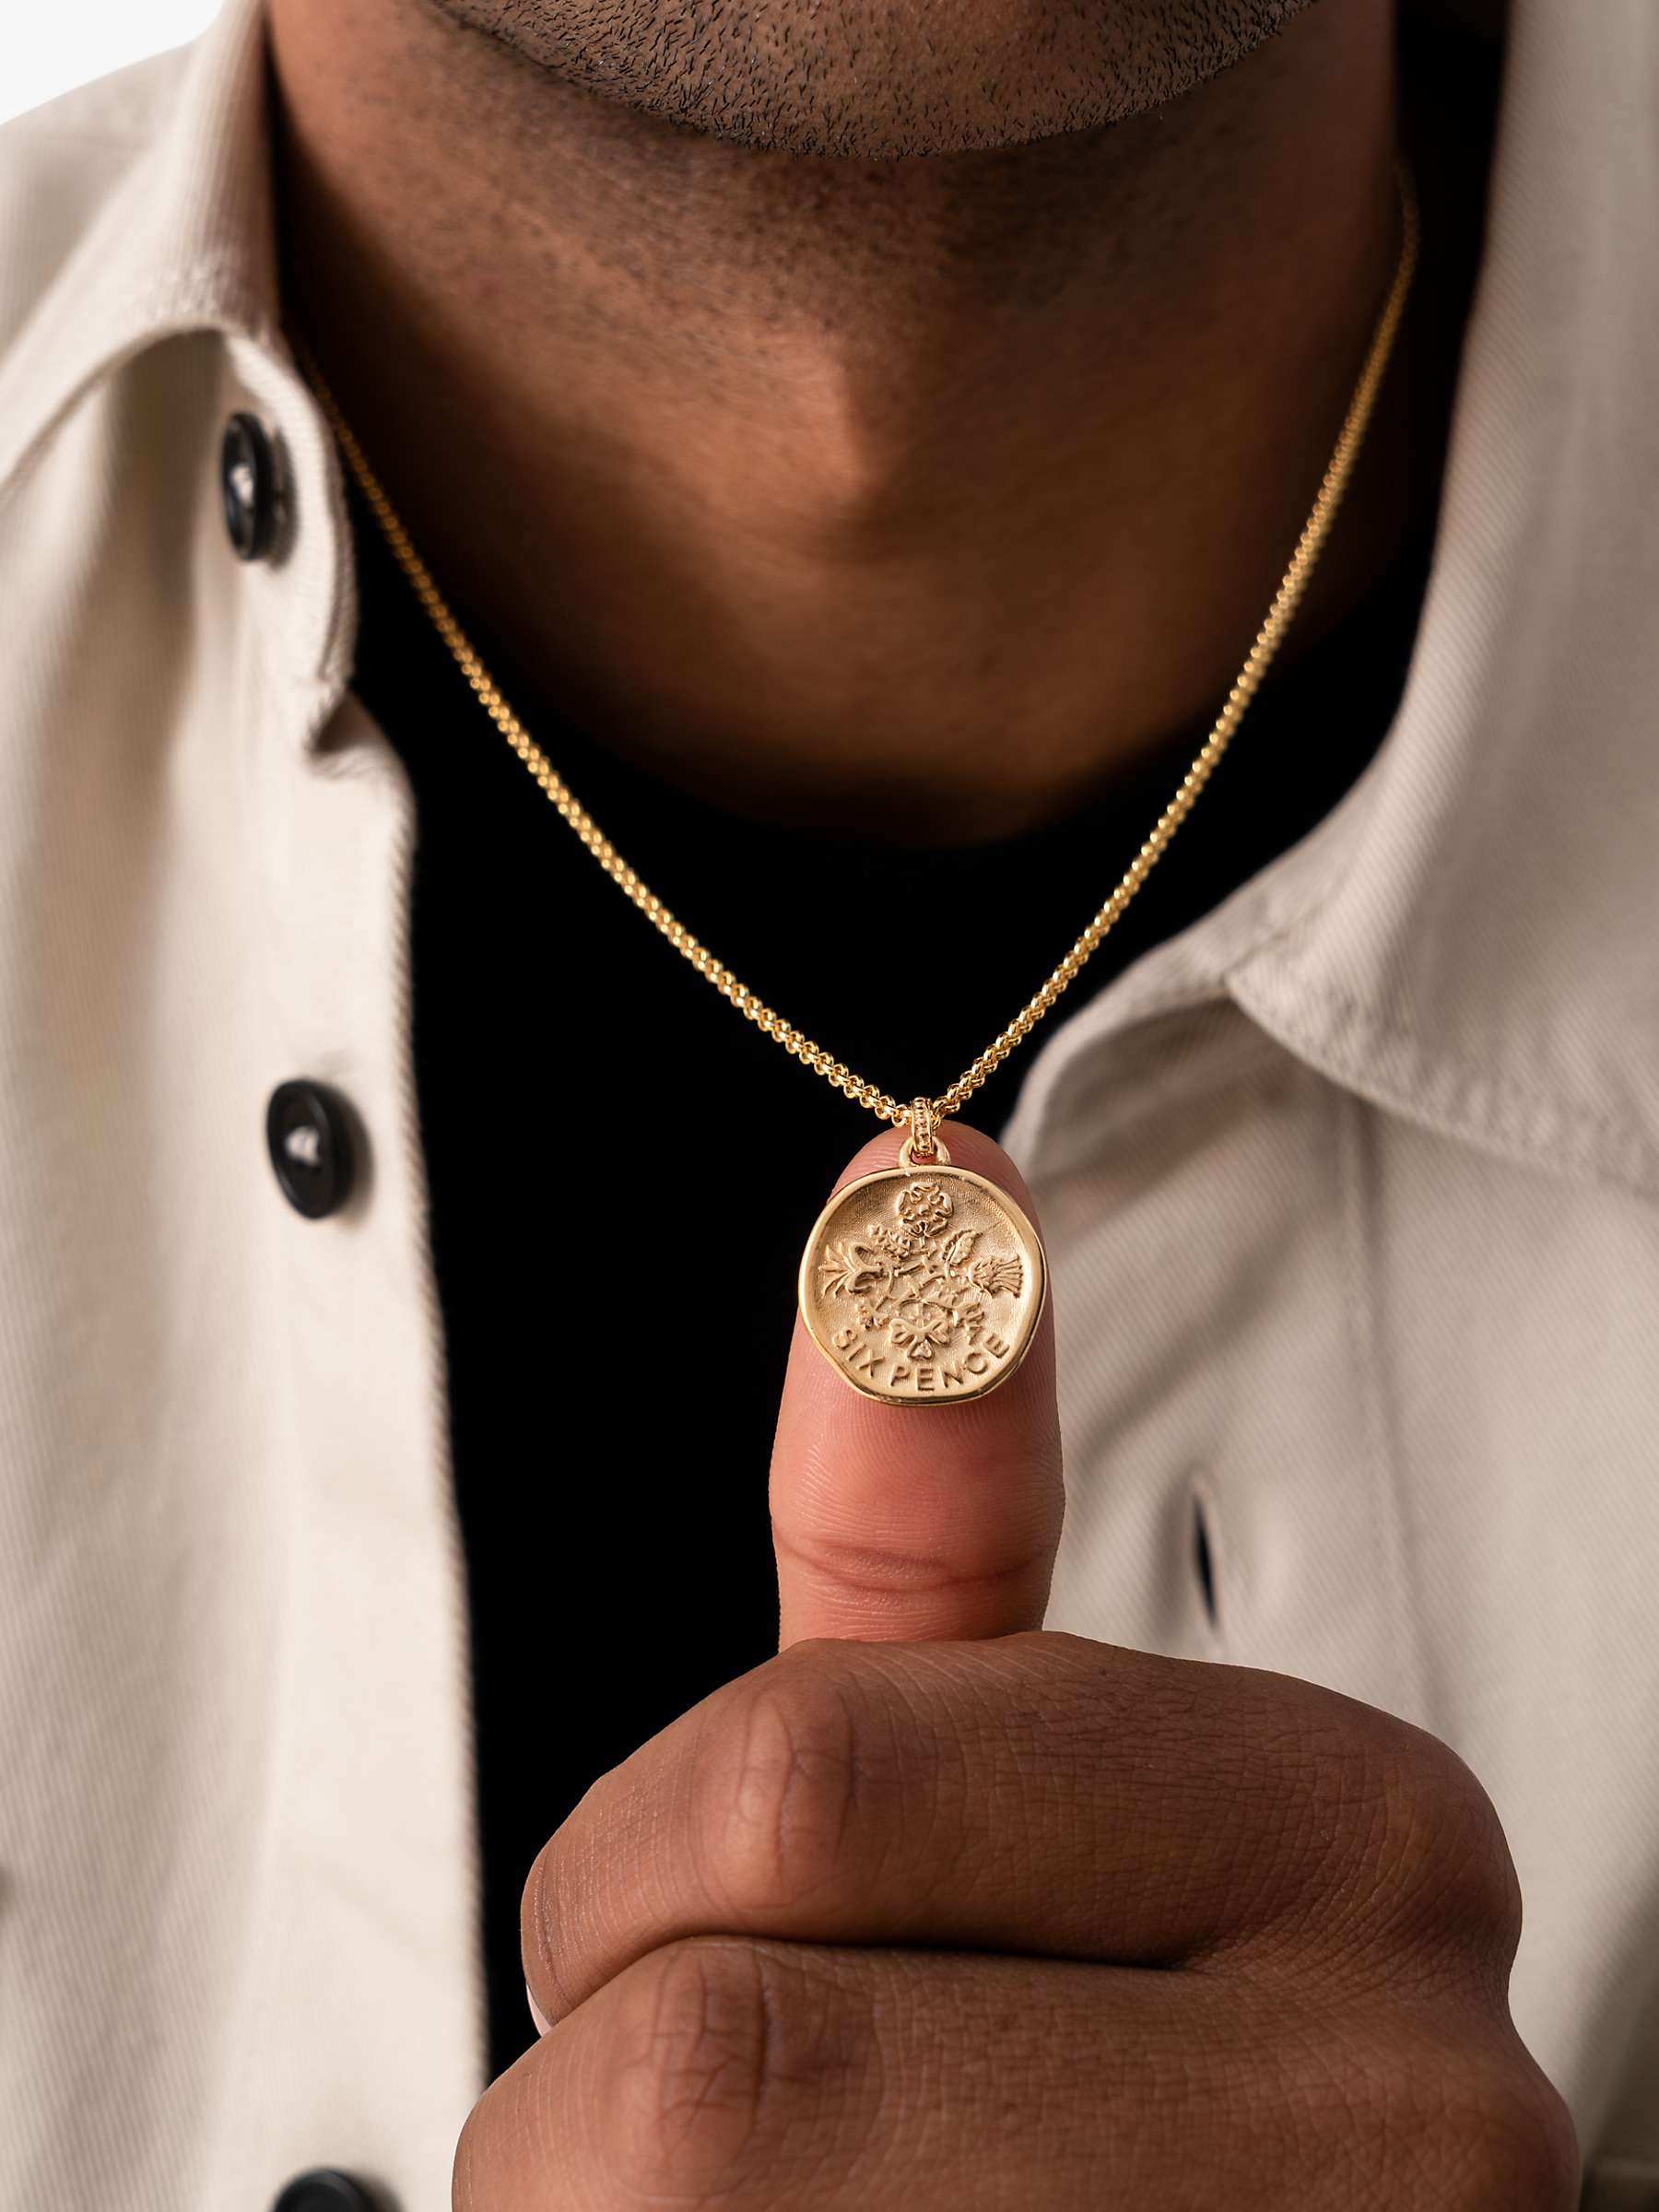 Buy Dower & Hall Men's Lucky Sixpence Talisman Pendant Necklace, Gold Online at johnlewis.com